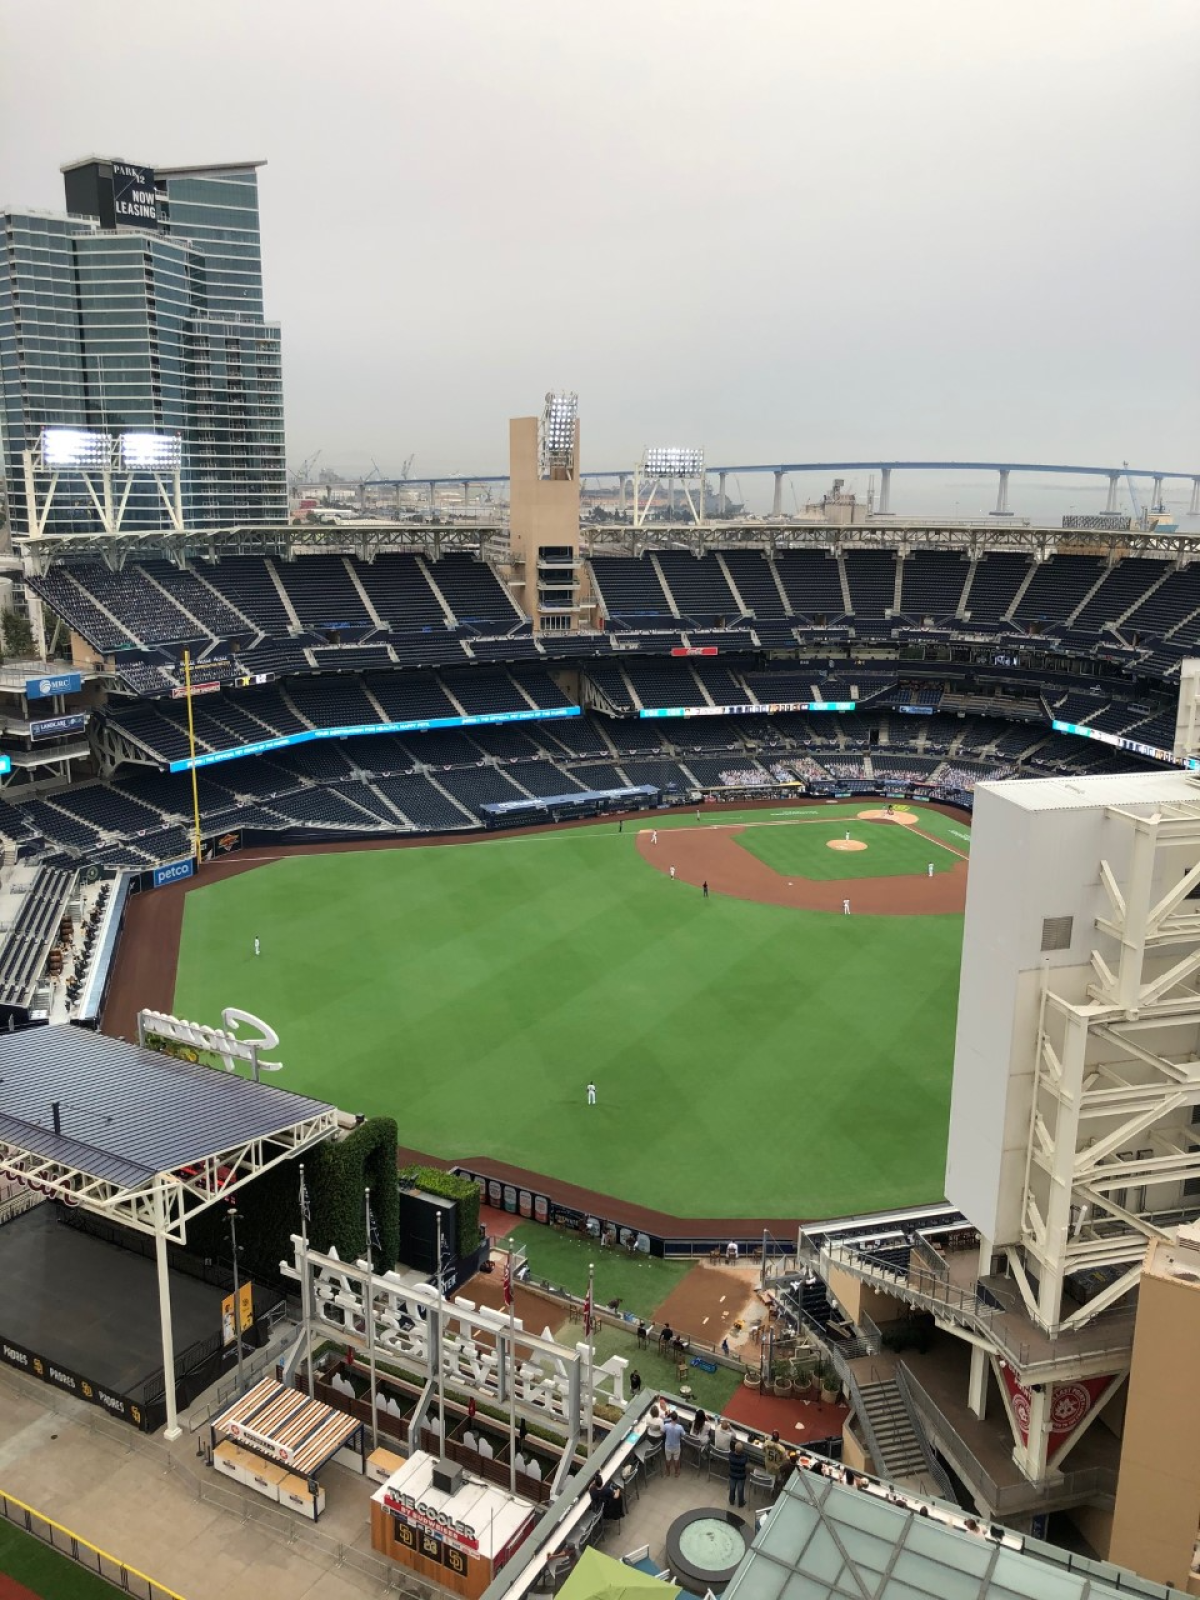 A view of Petco Park in San Diego.